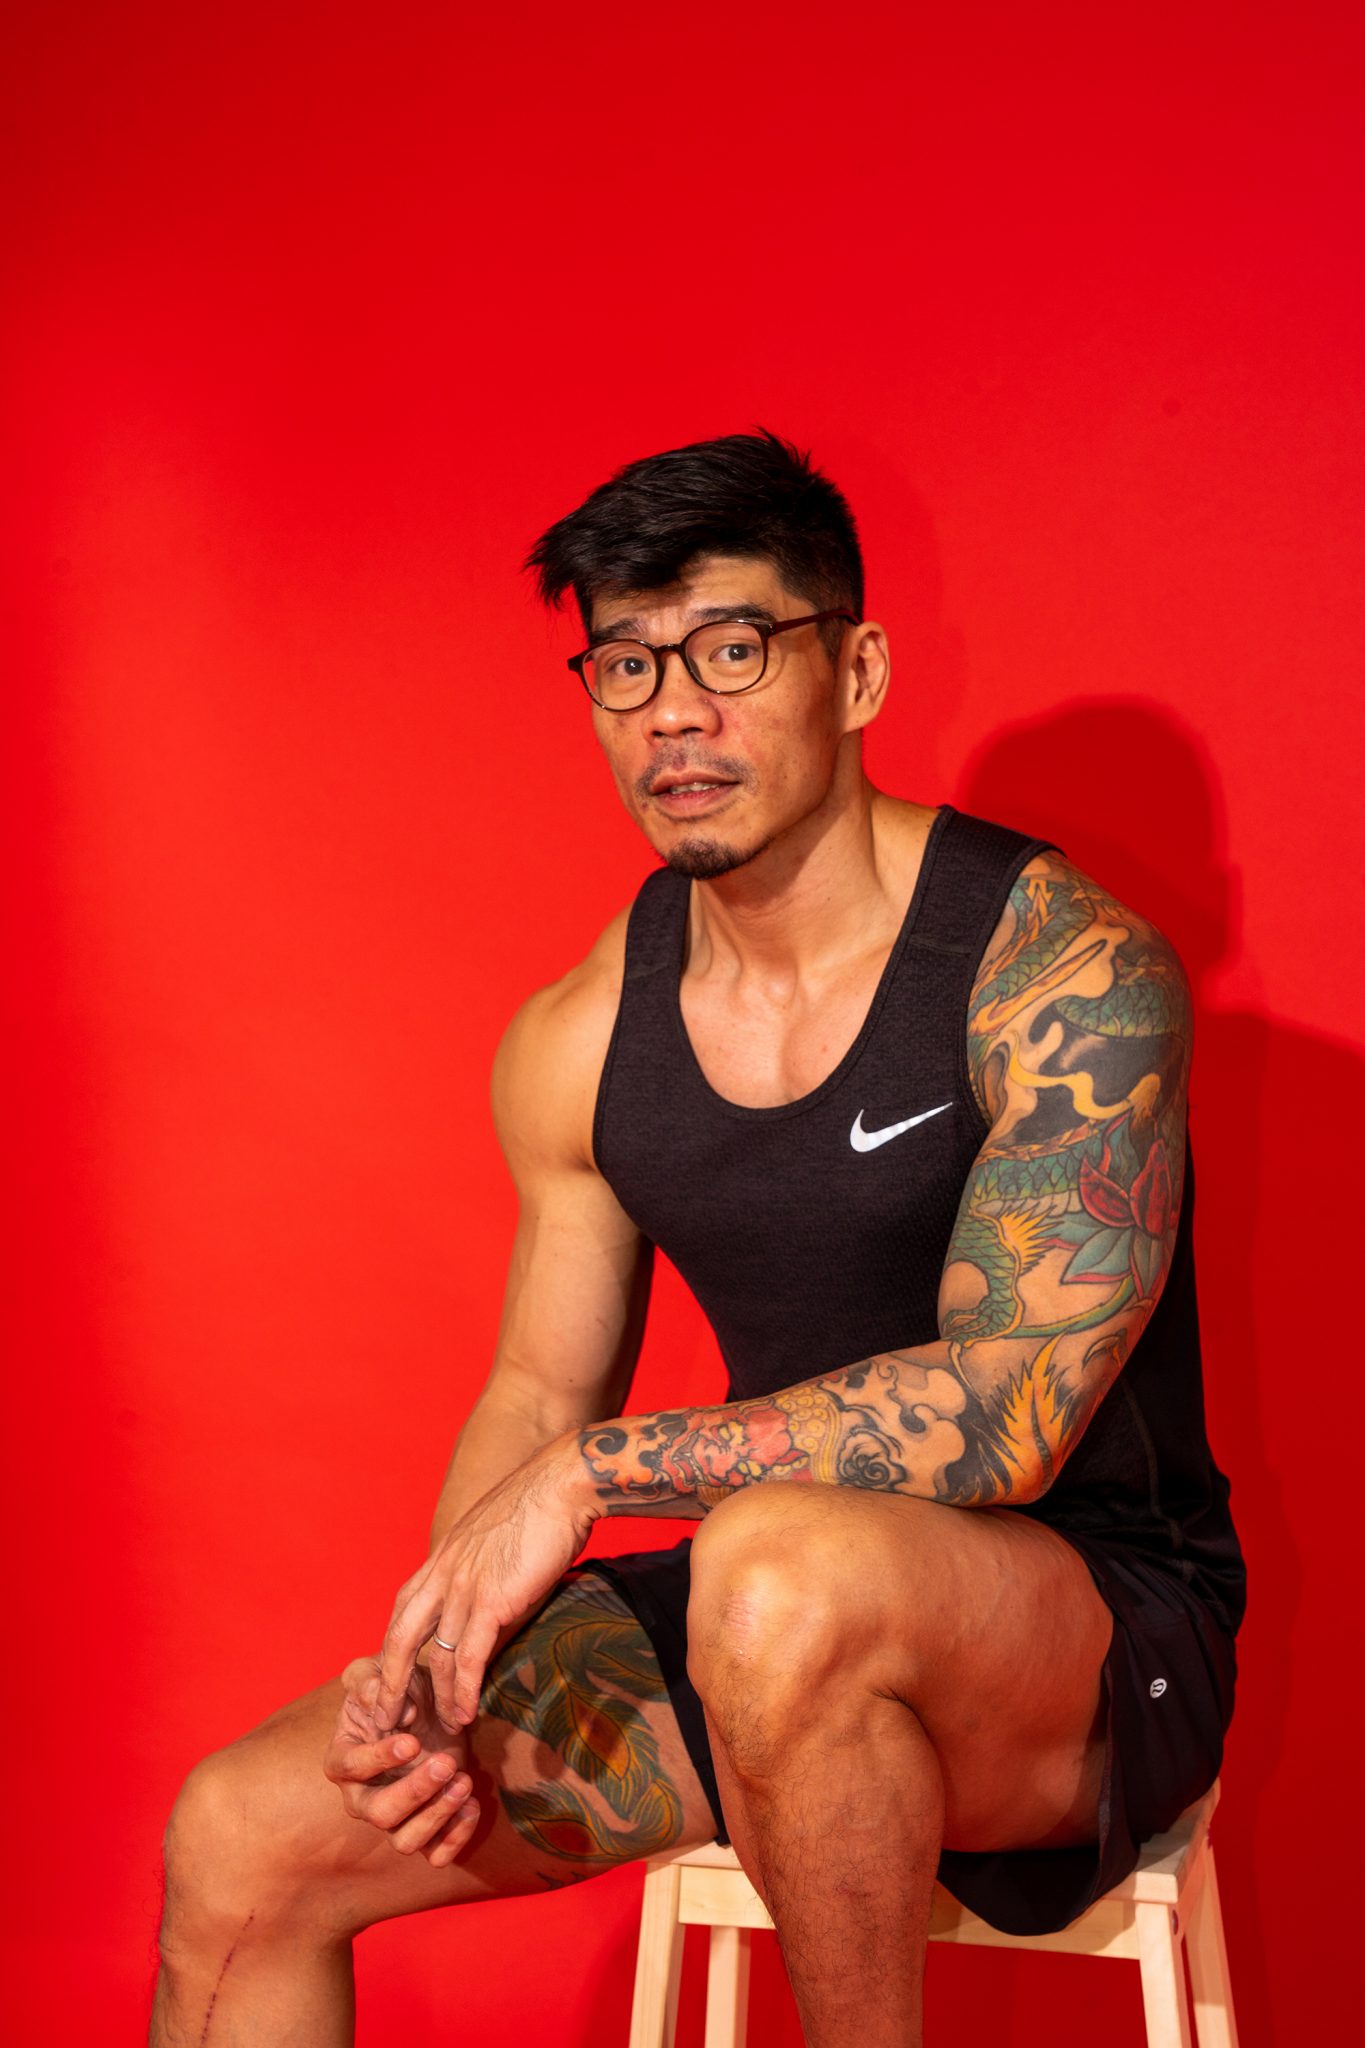 Kerwin Go is currently training for Olympia Amateur Japan 2019, training twice a day and allotting cardio workouts in the morning